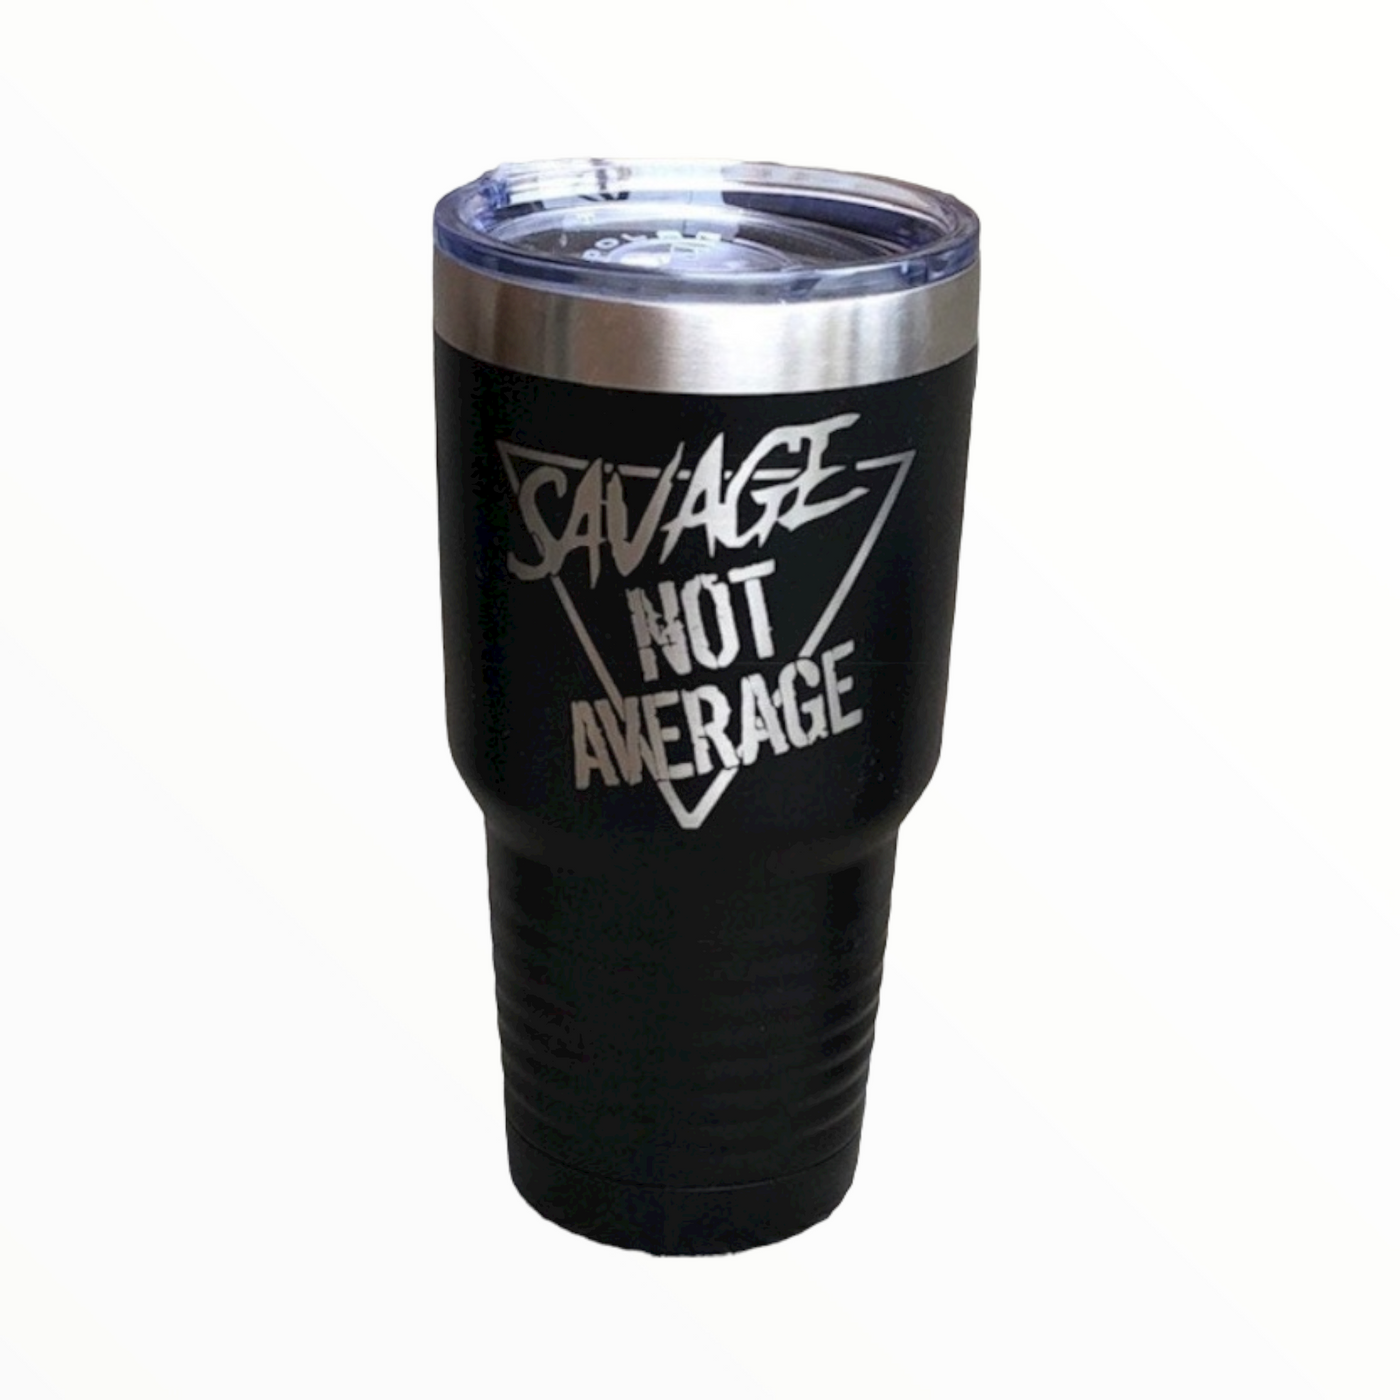 Savage Not Average Insulated Cup 30 oz.